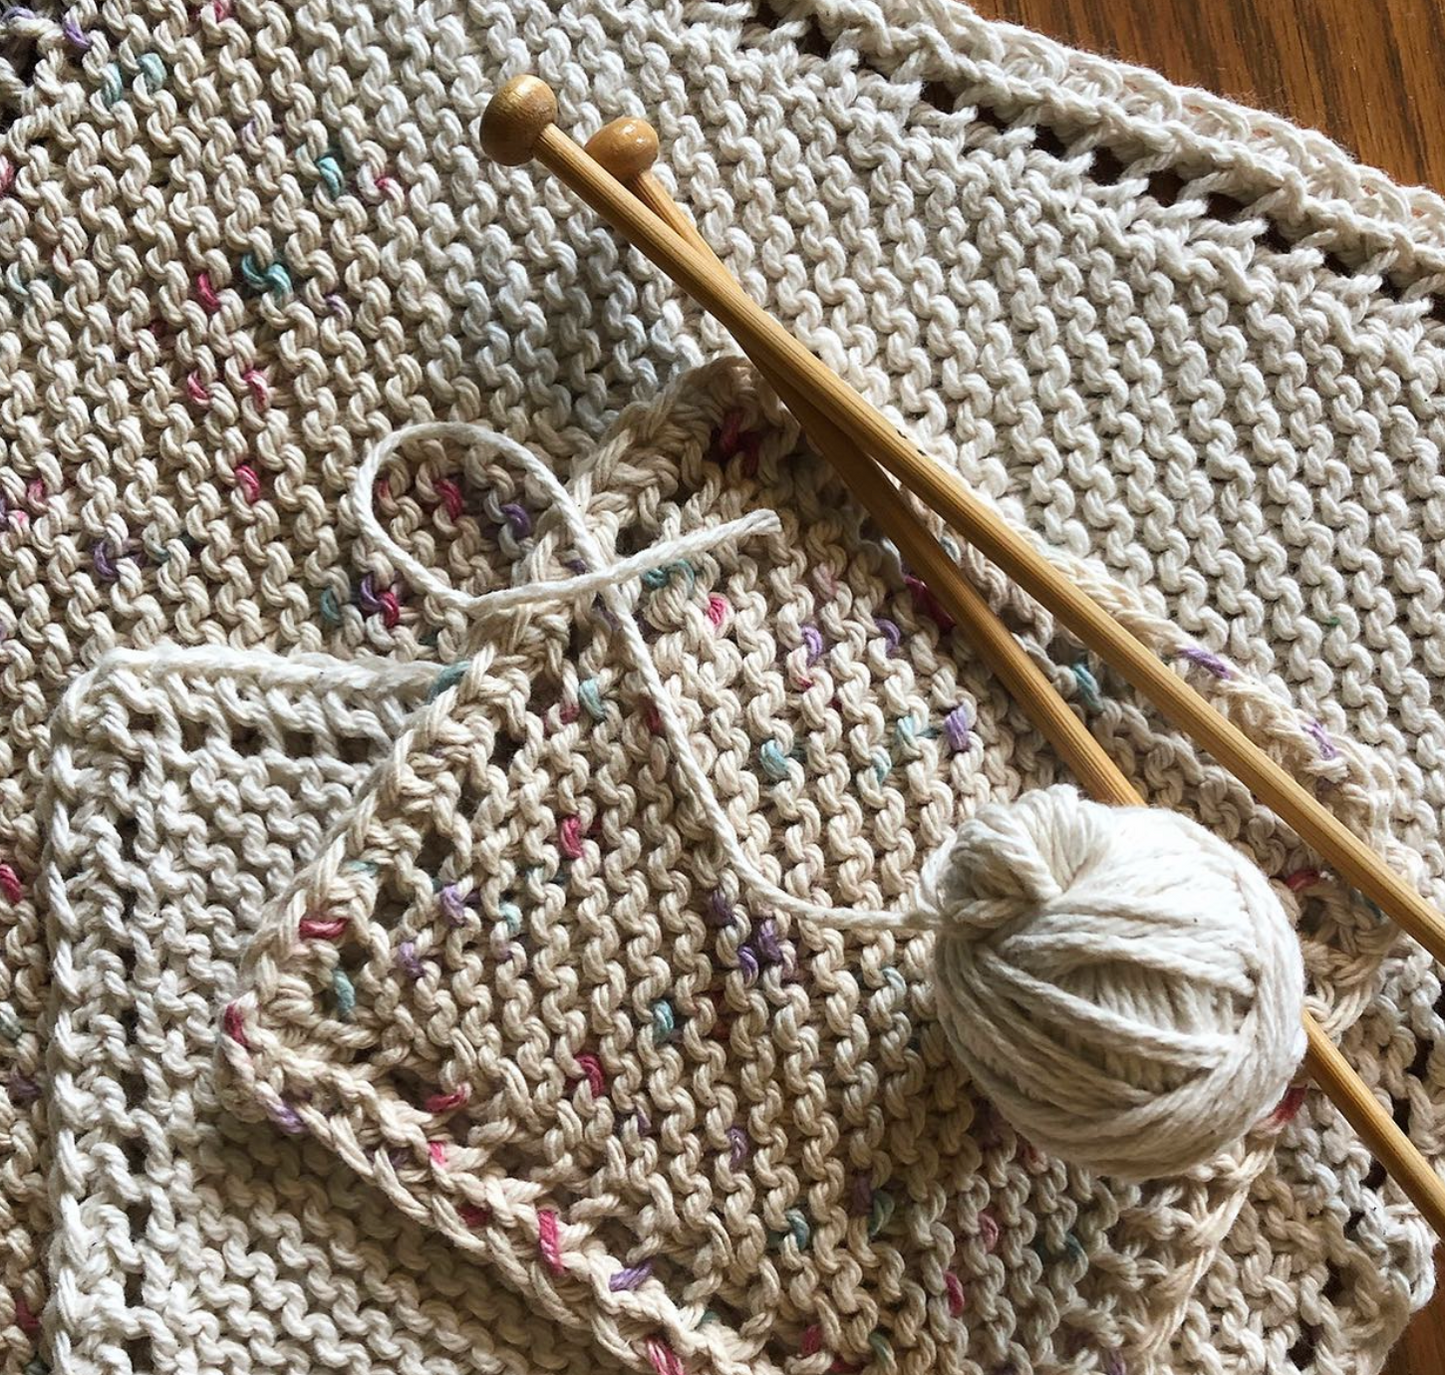 Knitting Course - Introduction